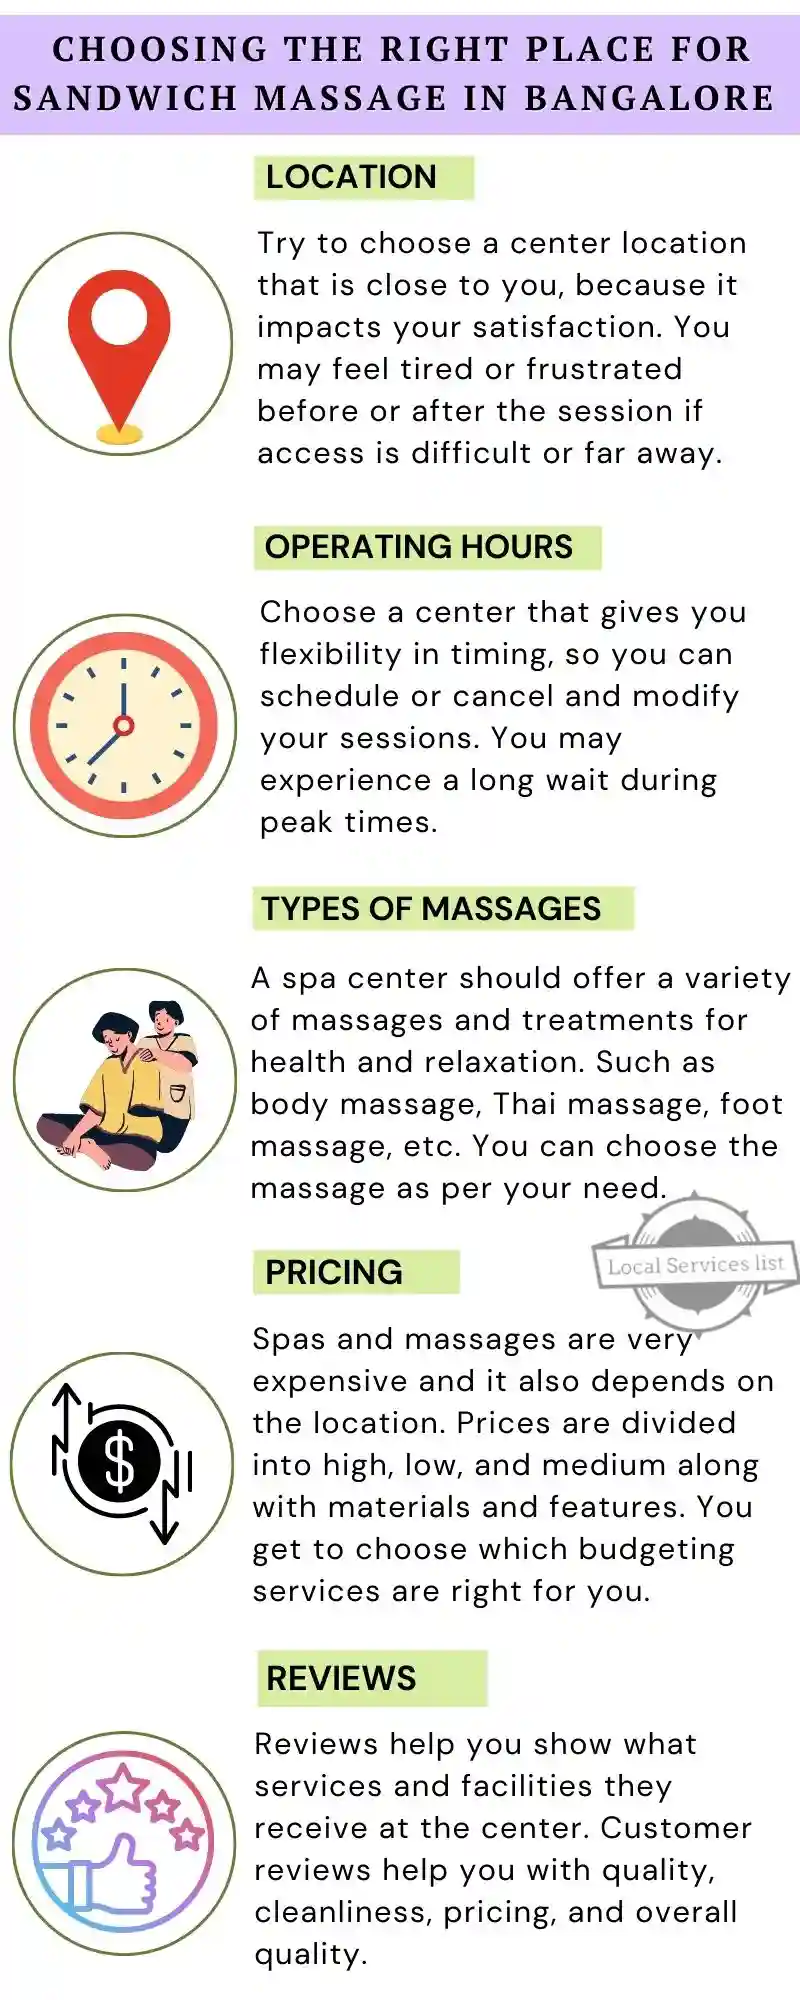 Choosing the Right Place for Sandwich Massage in Bangalore